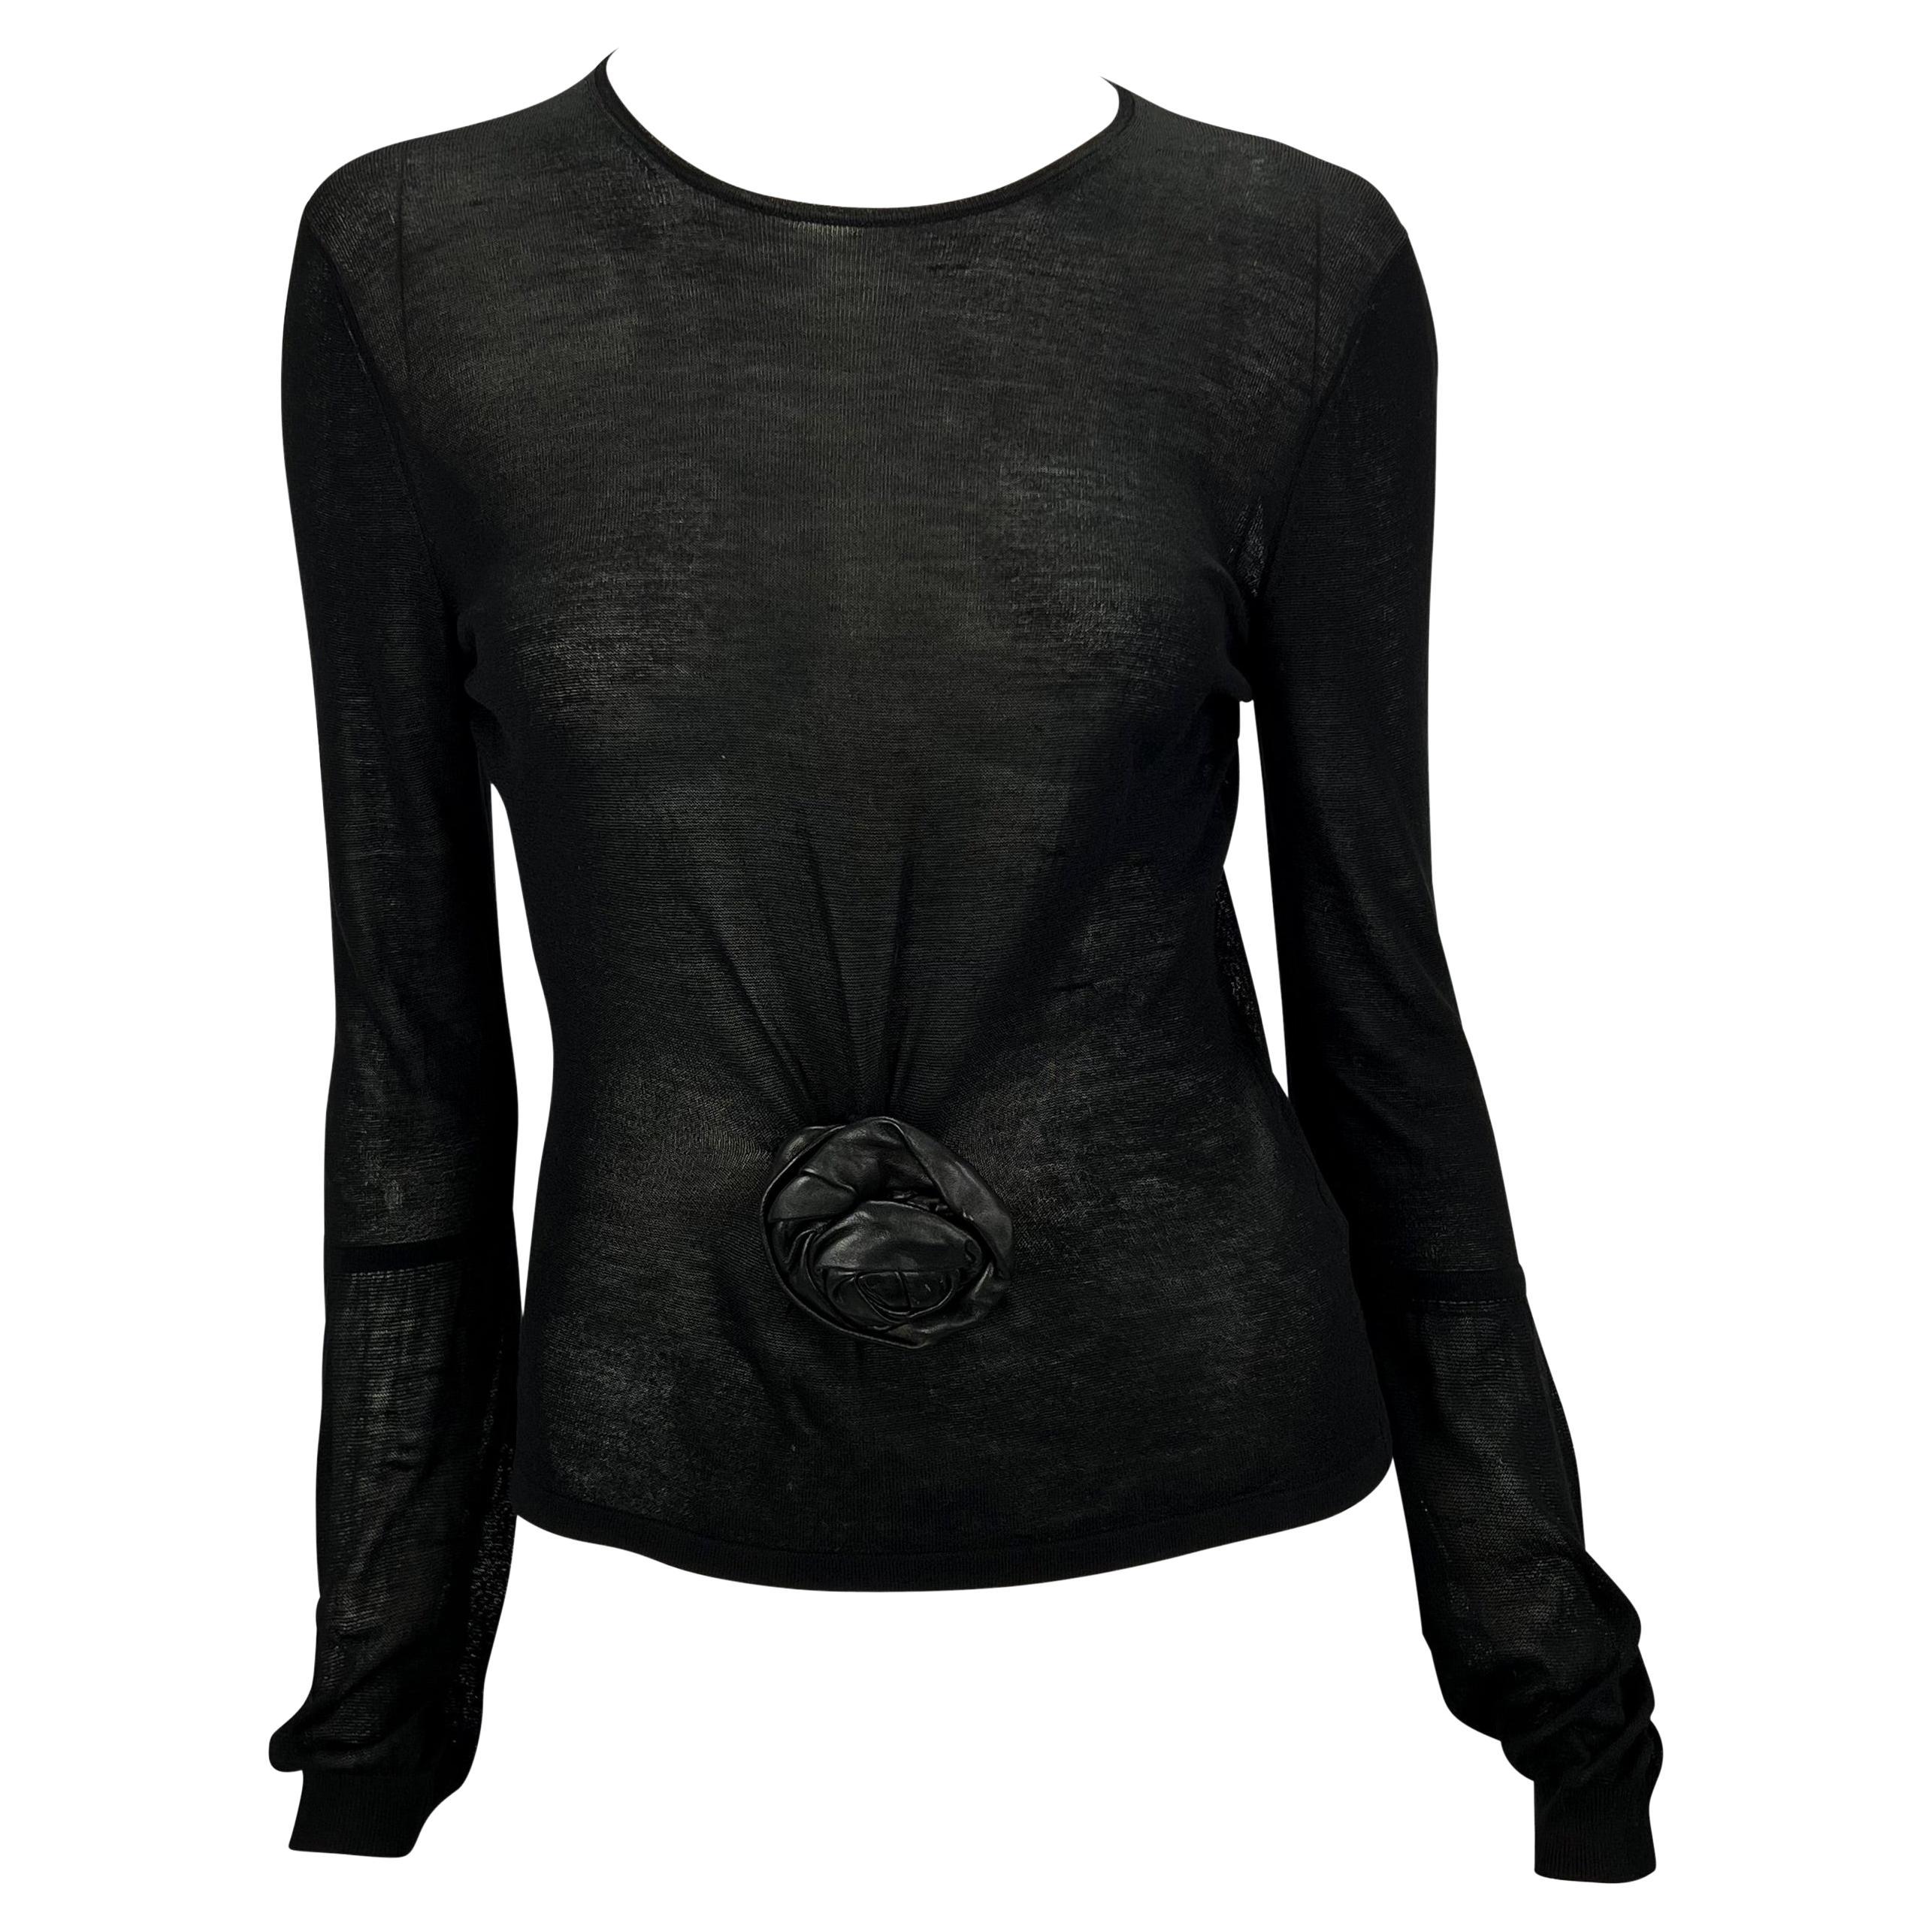 F/W 1999 Gucci by Tom Ford Runway Leather Flower Appliqué Sheer Knit Top For Sale